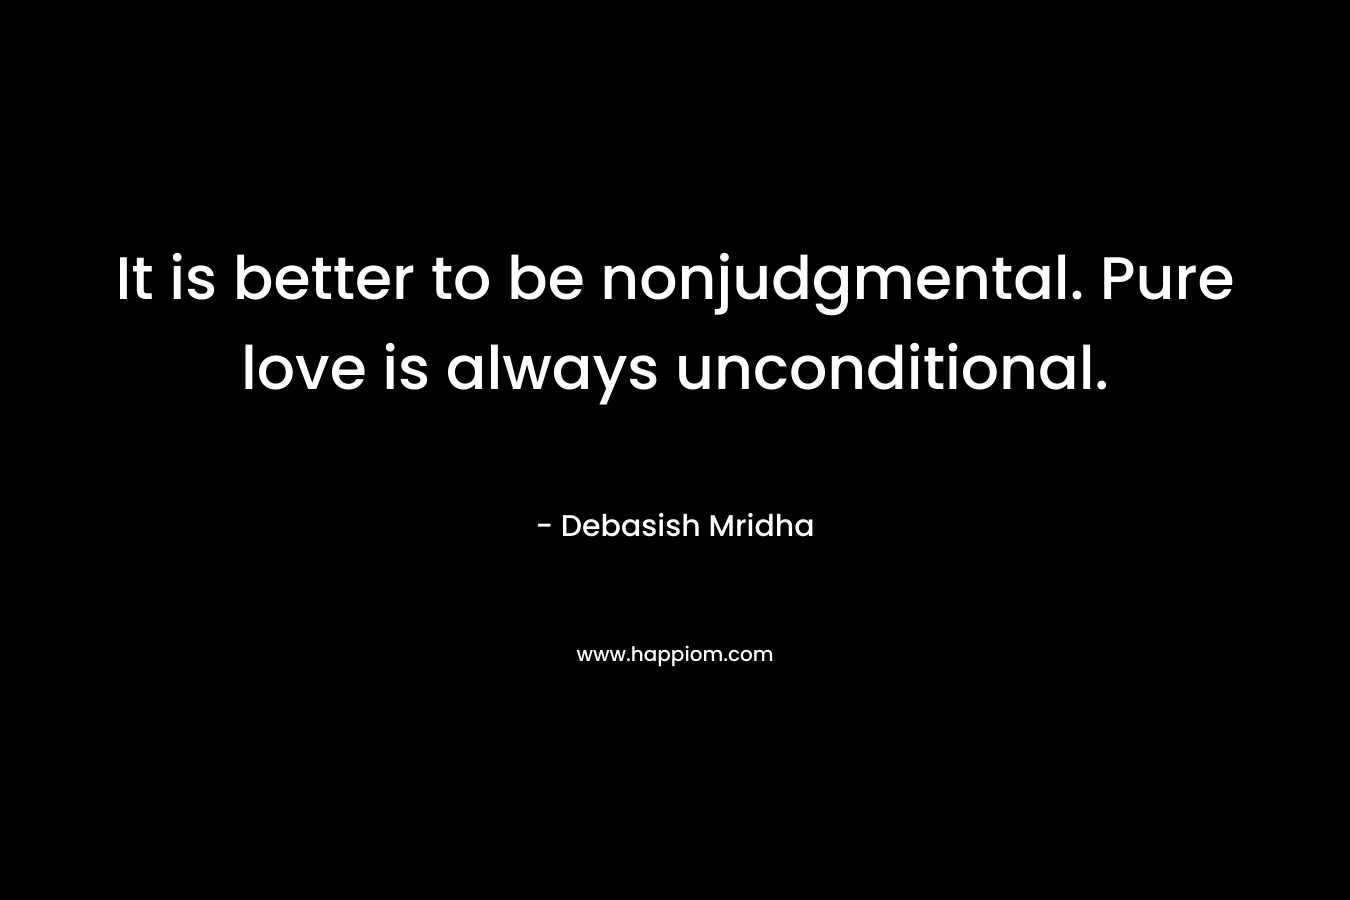 It is better to be nonjudgmental. Pure love is always unconditional.